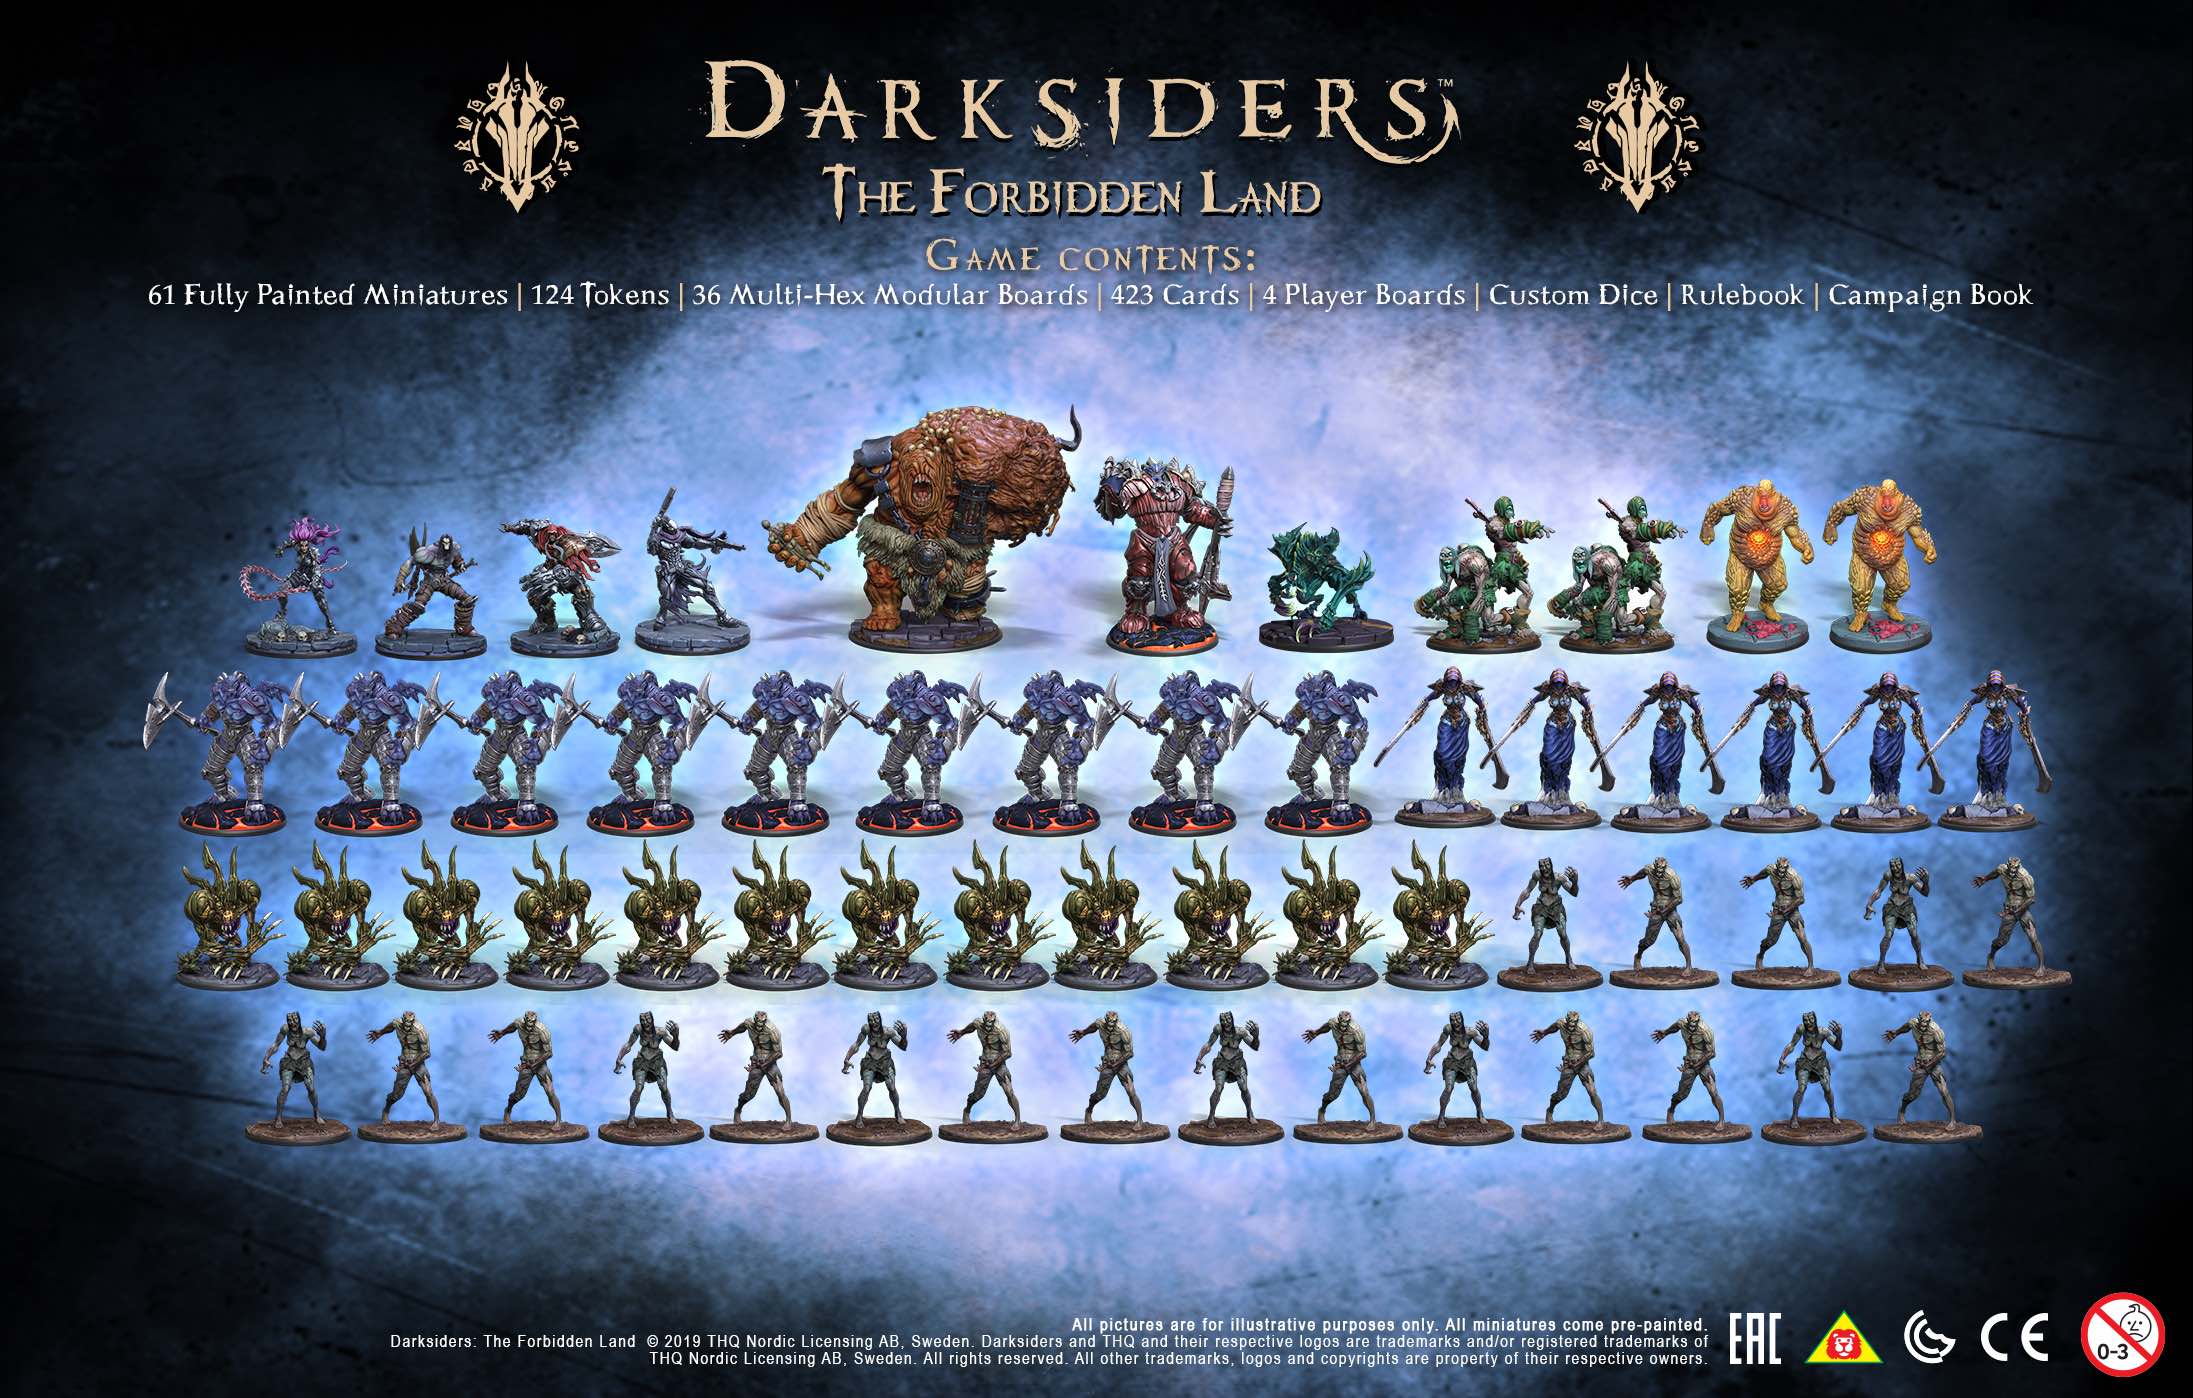 Darksiders: The Forbidden Land Contents Photo